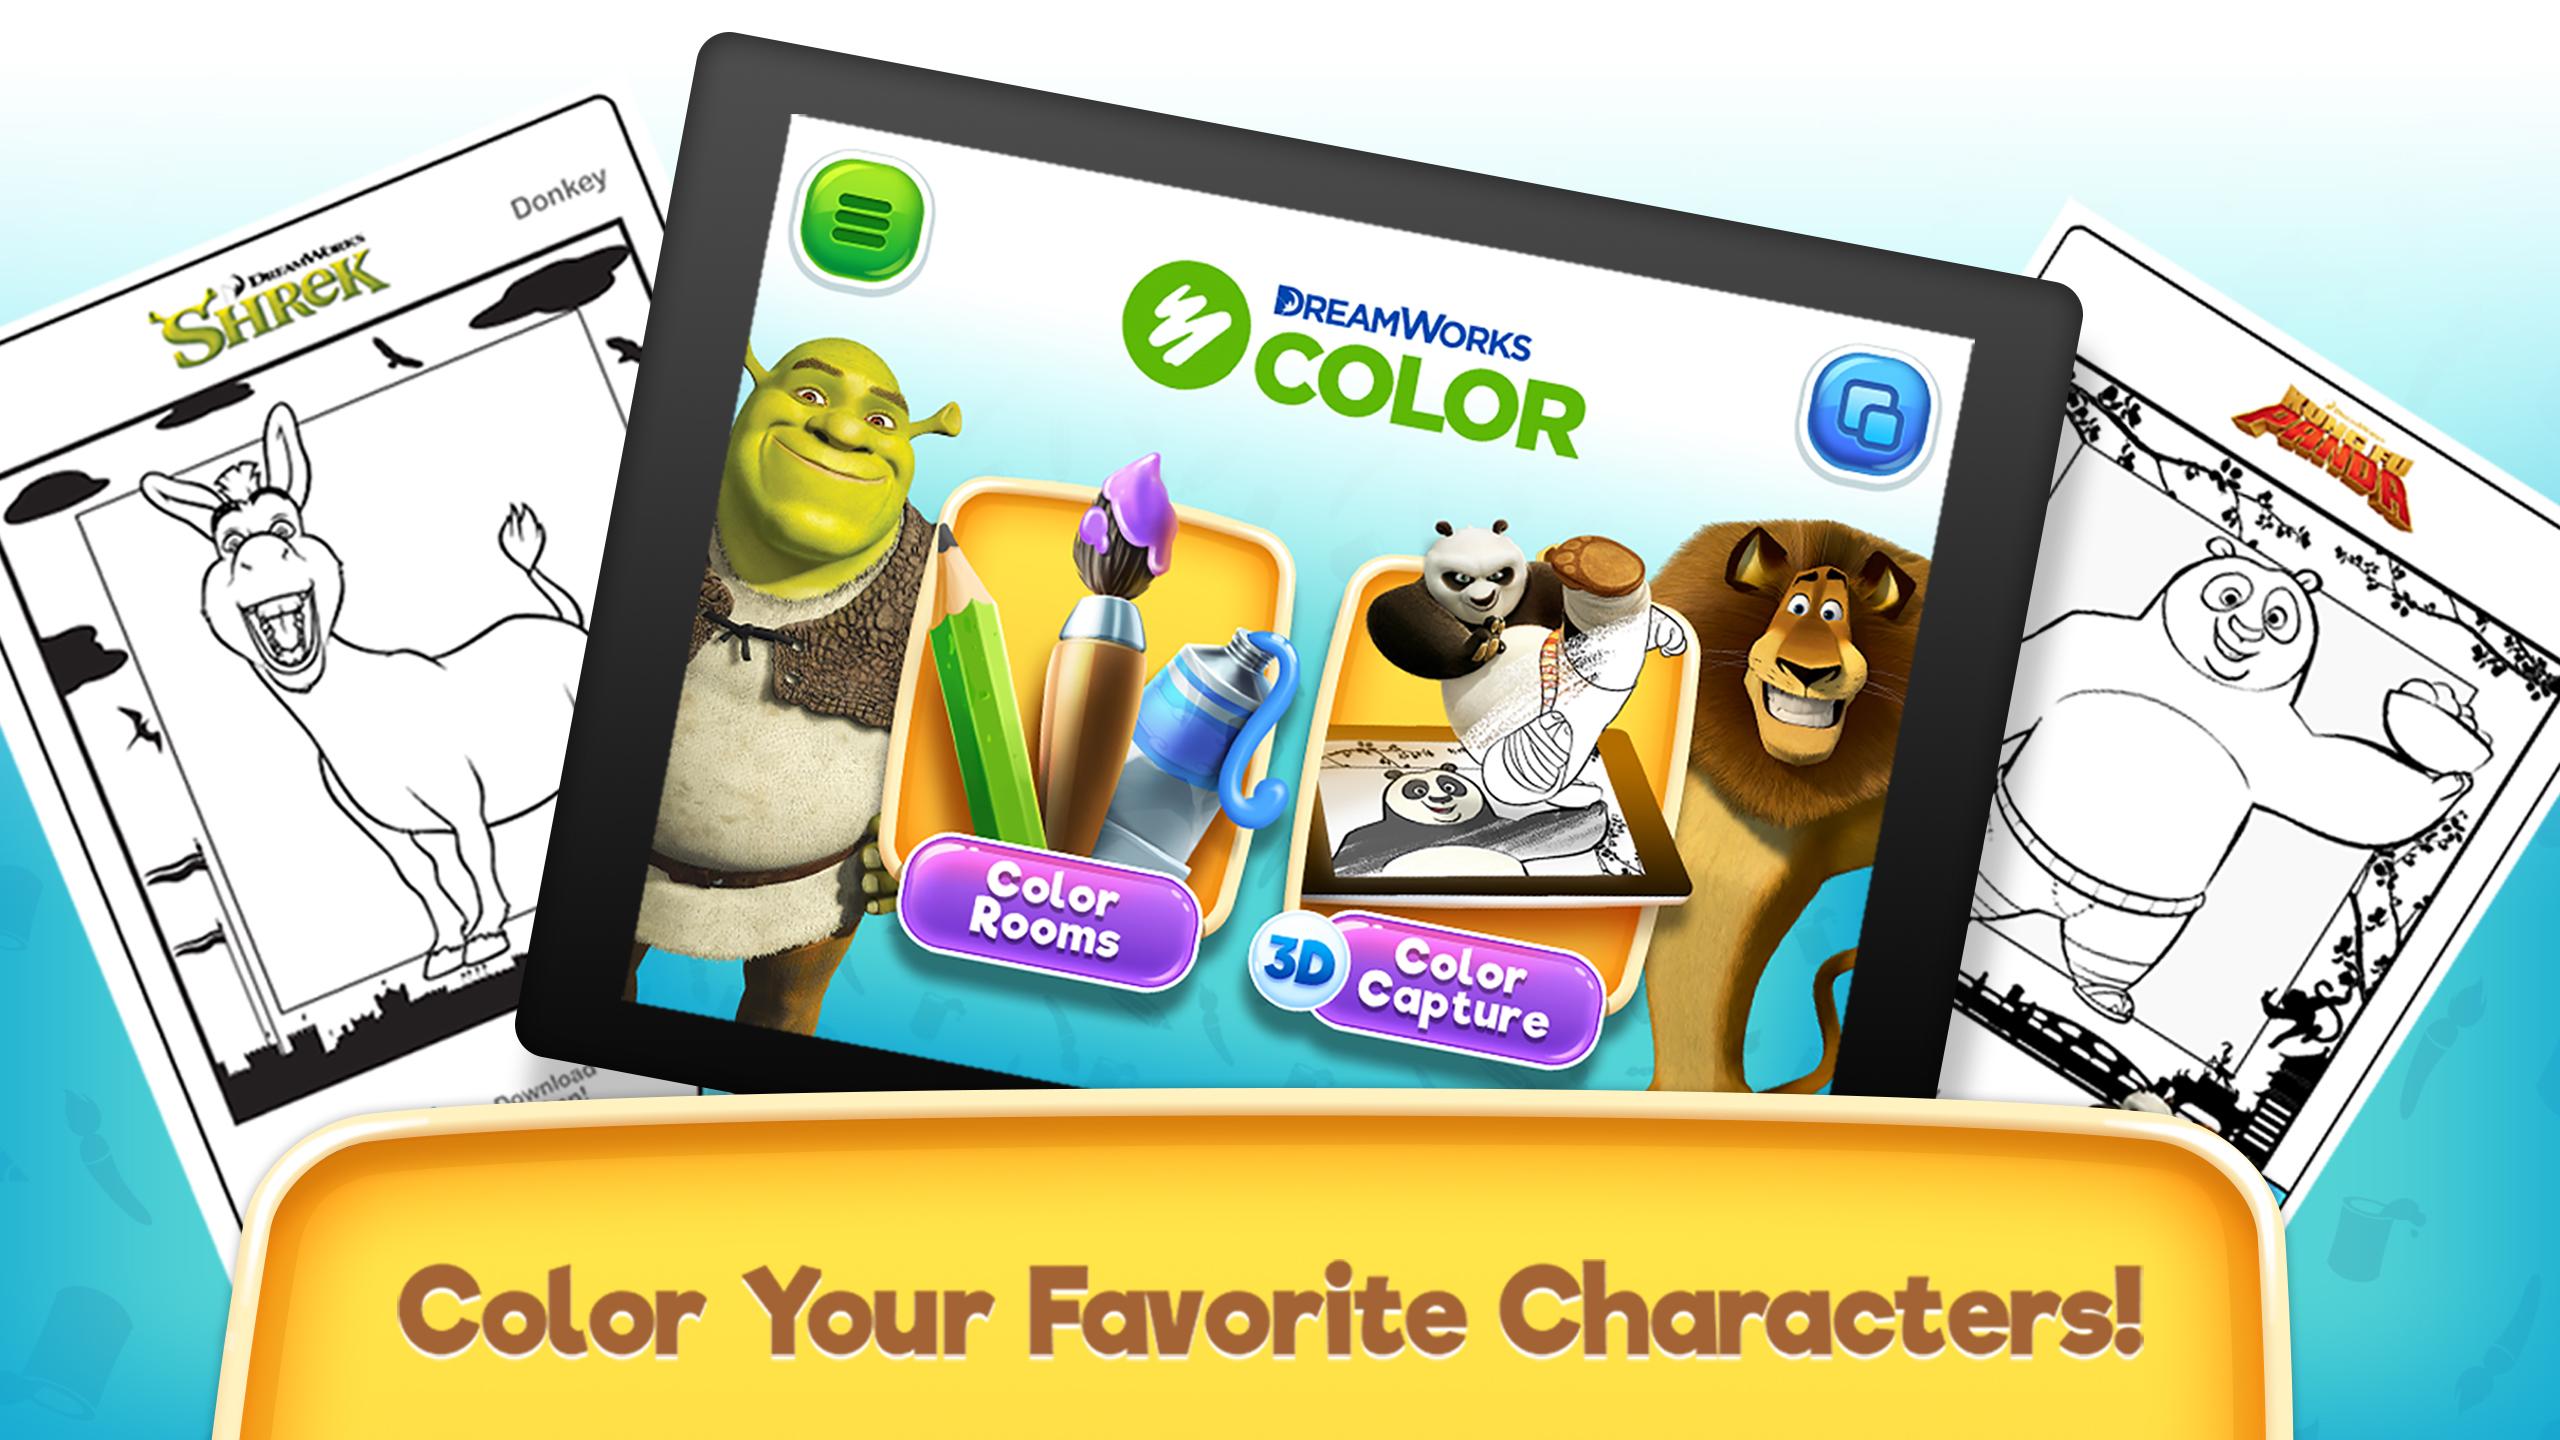 Android application DreamWorks COLOR screenshort